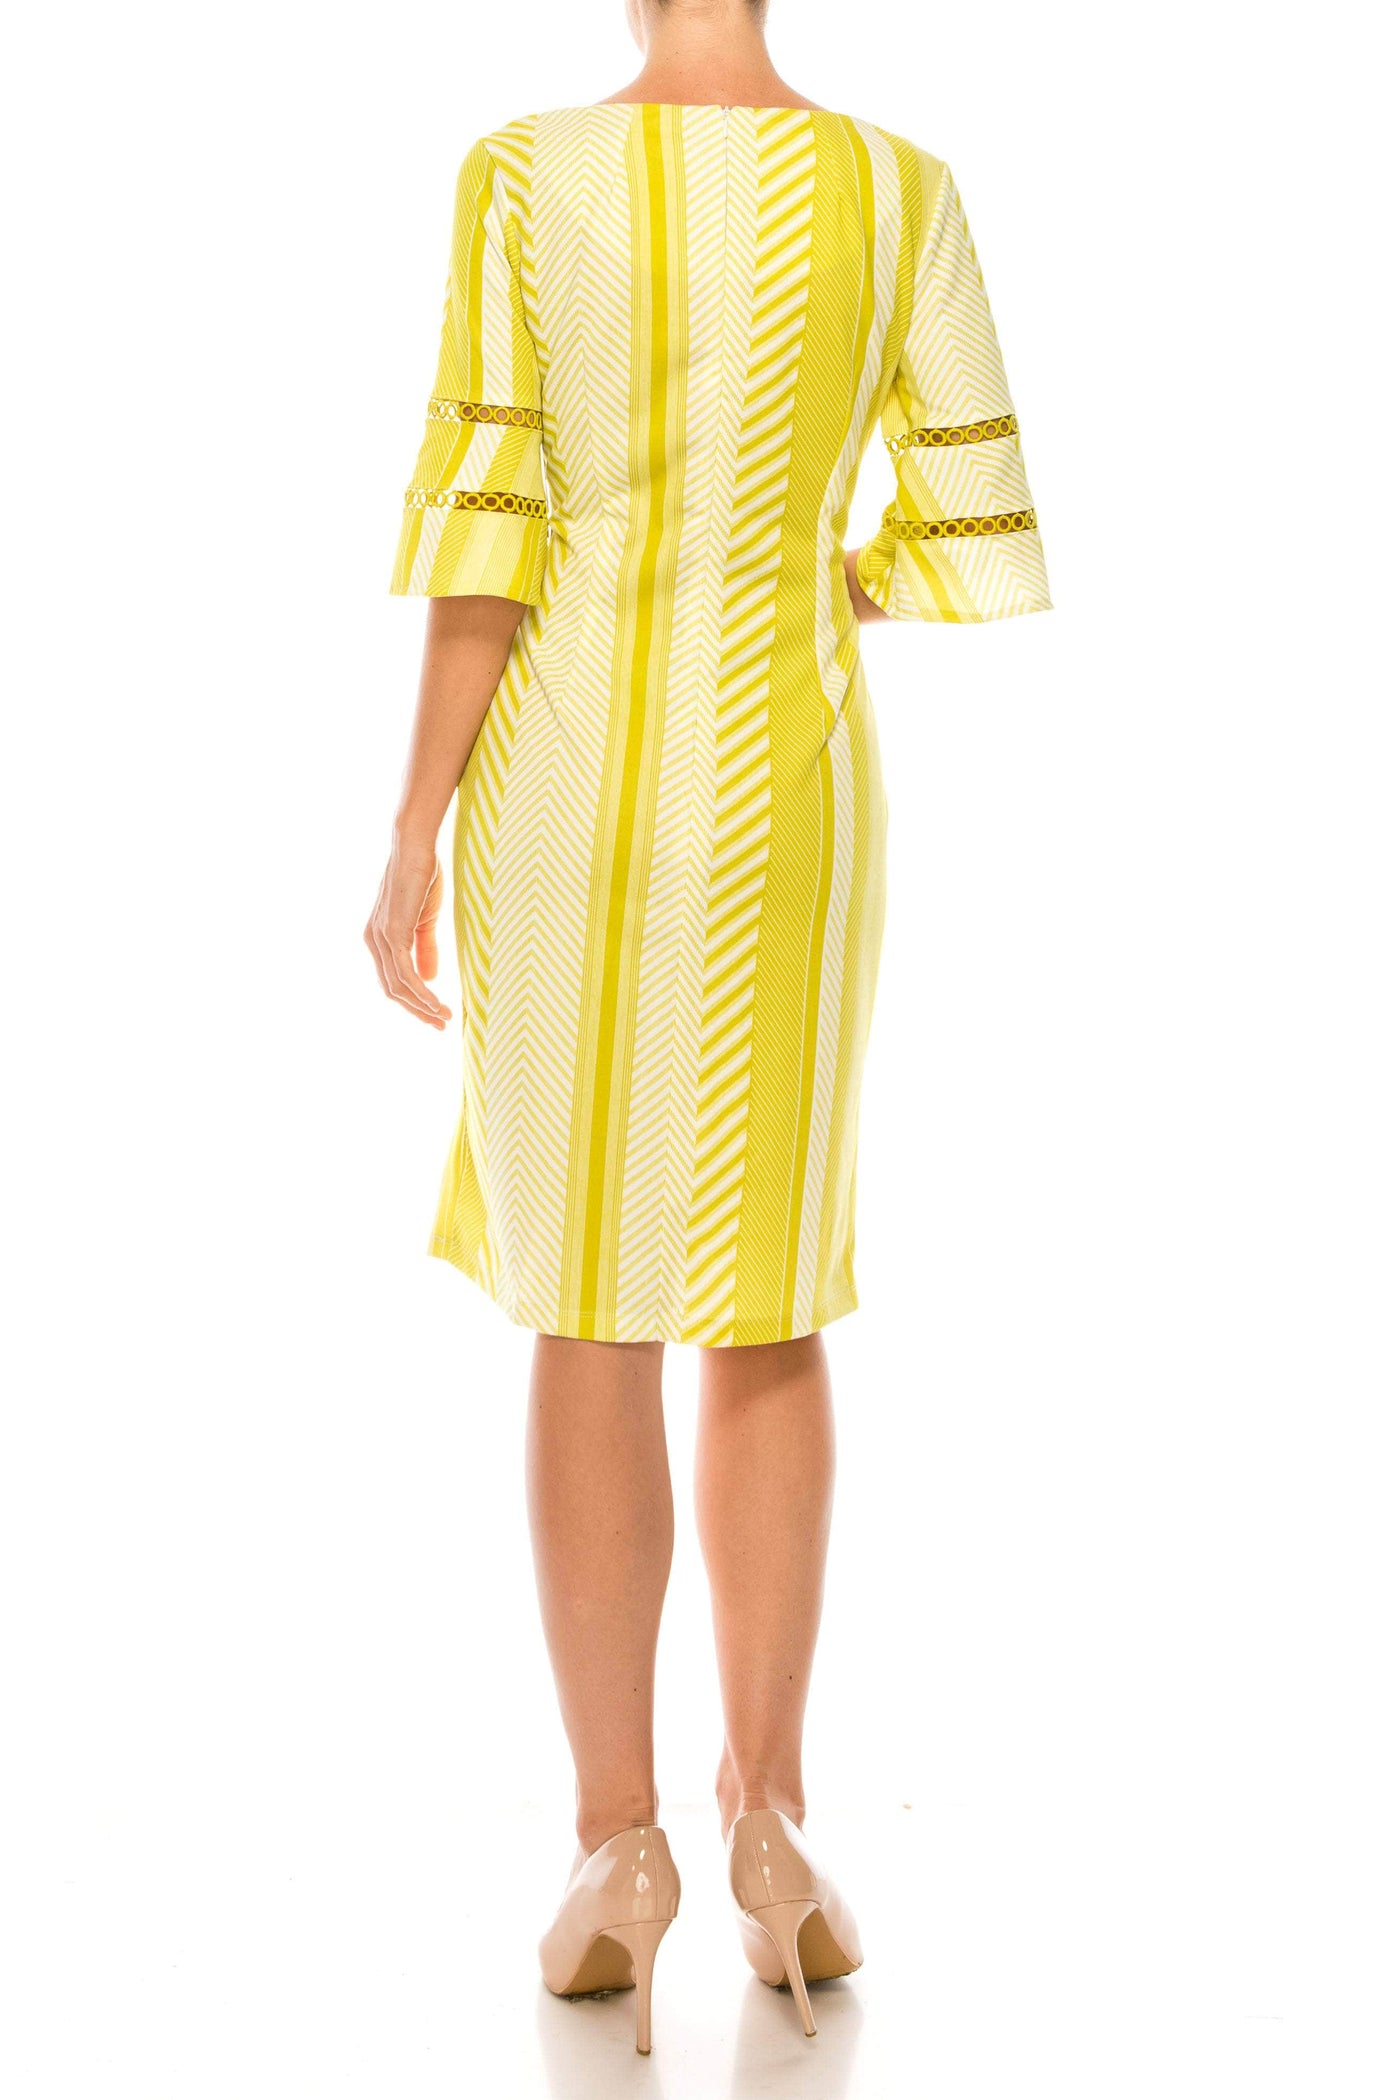 ILE Clothing SCP5901RE - Bell Sleeve Print Dress Special Occasion Dresses